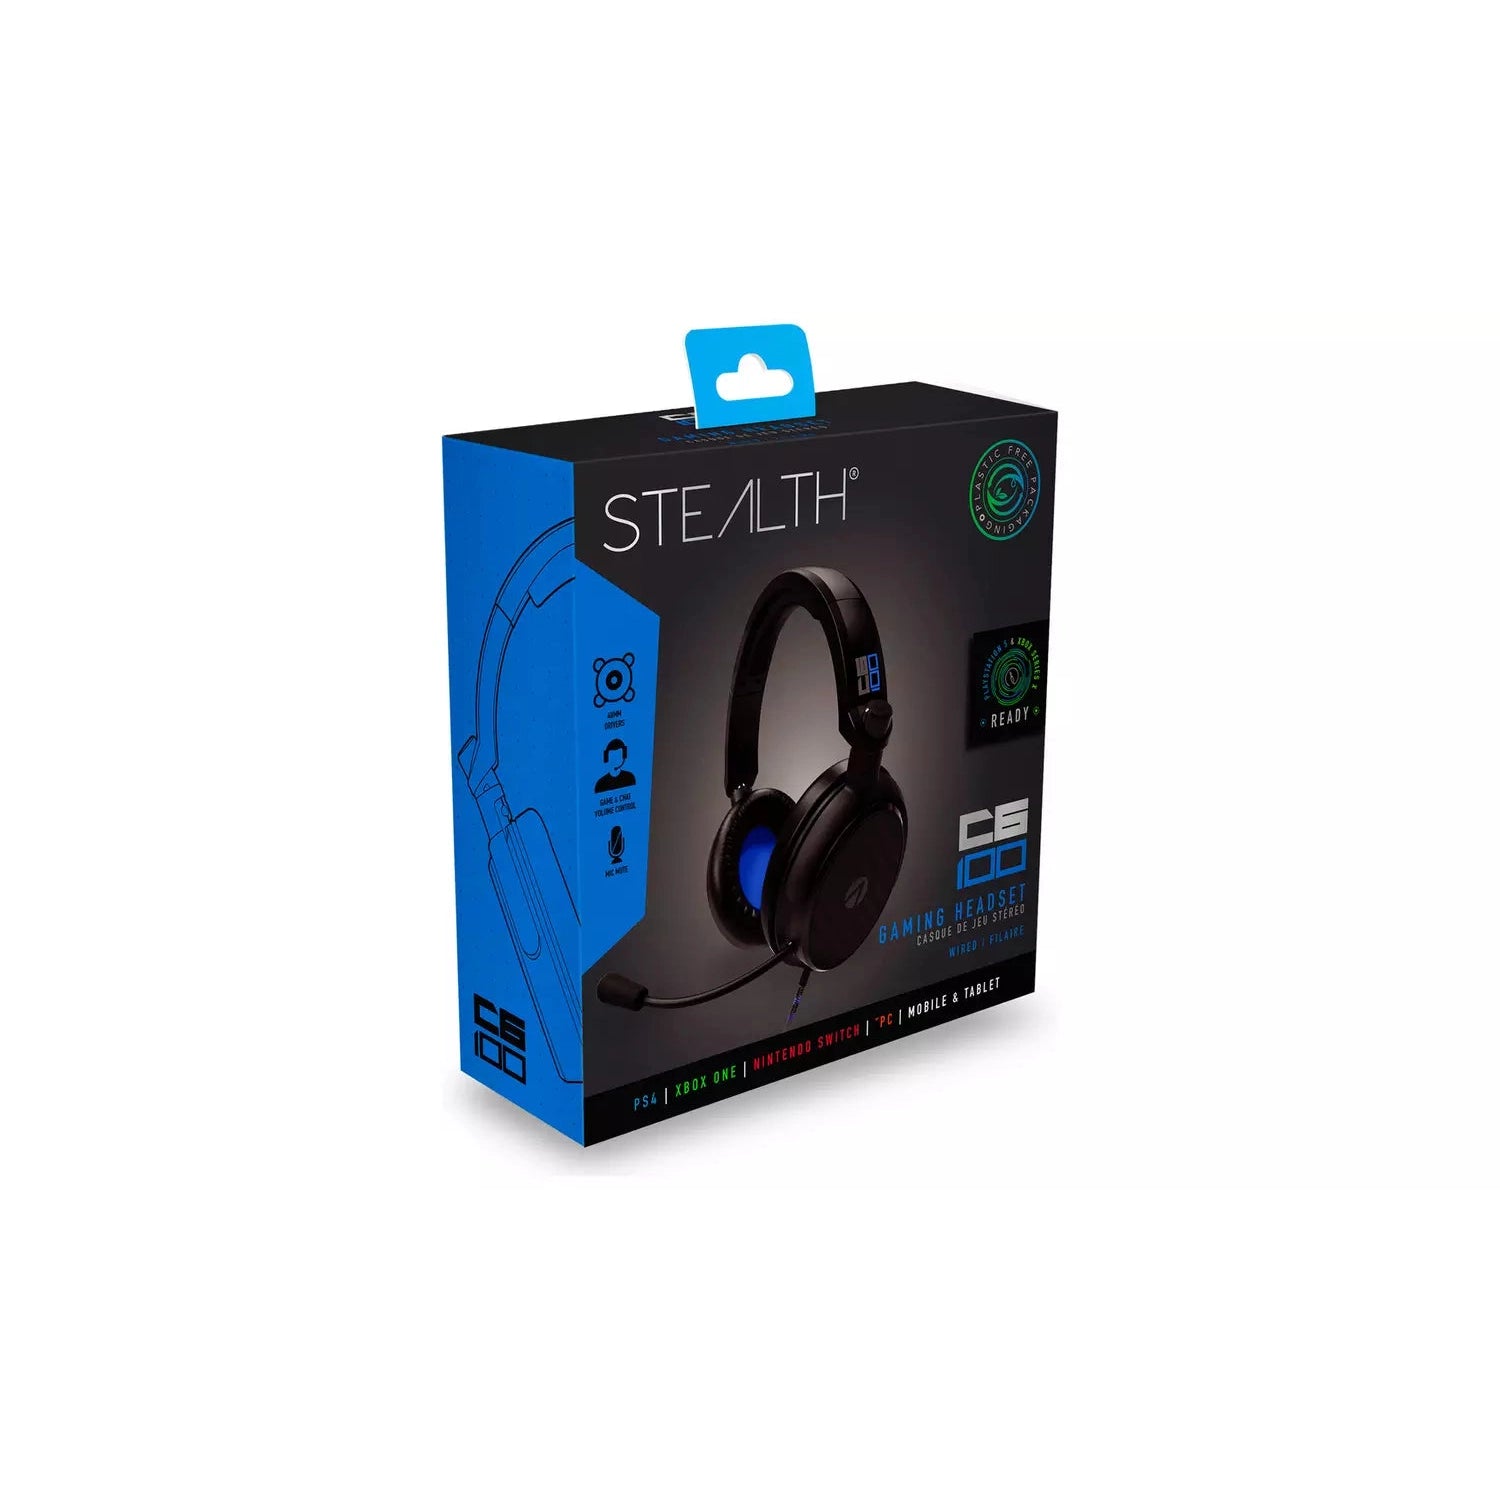 Stealth C6-100 Gaming Headset and Stand | Stock Must Go